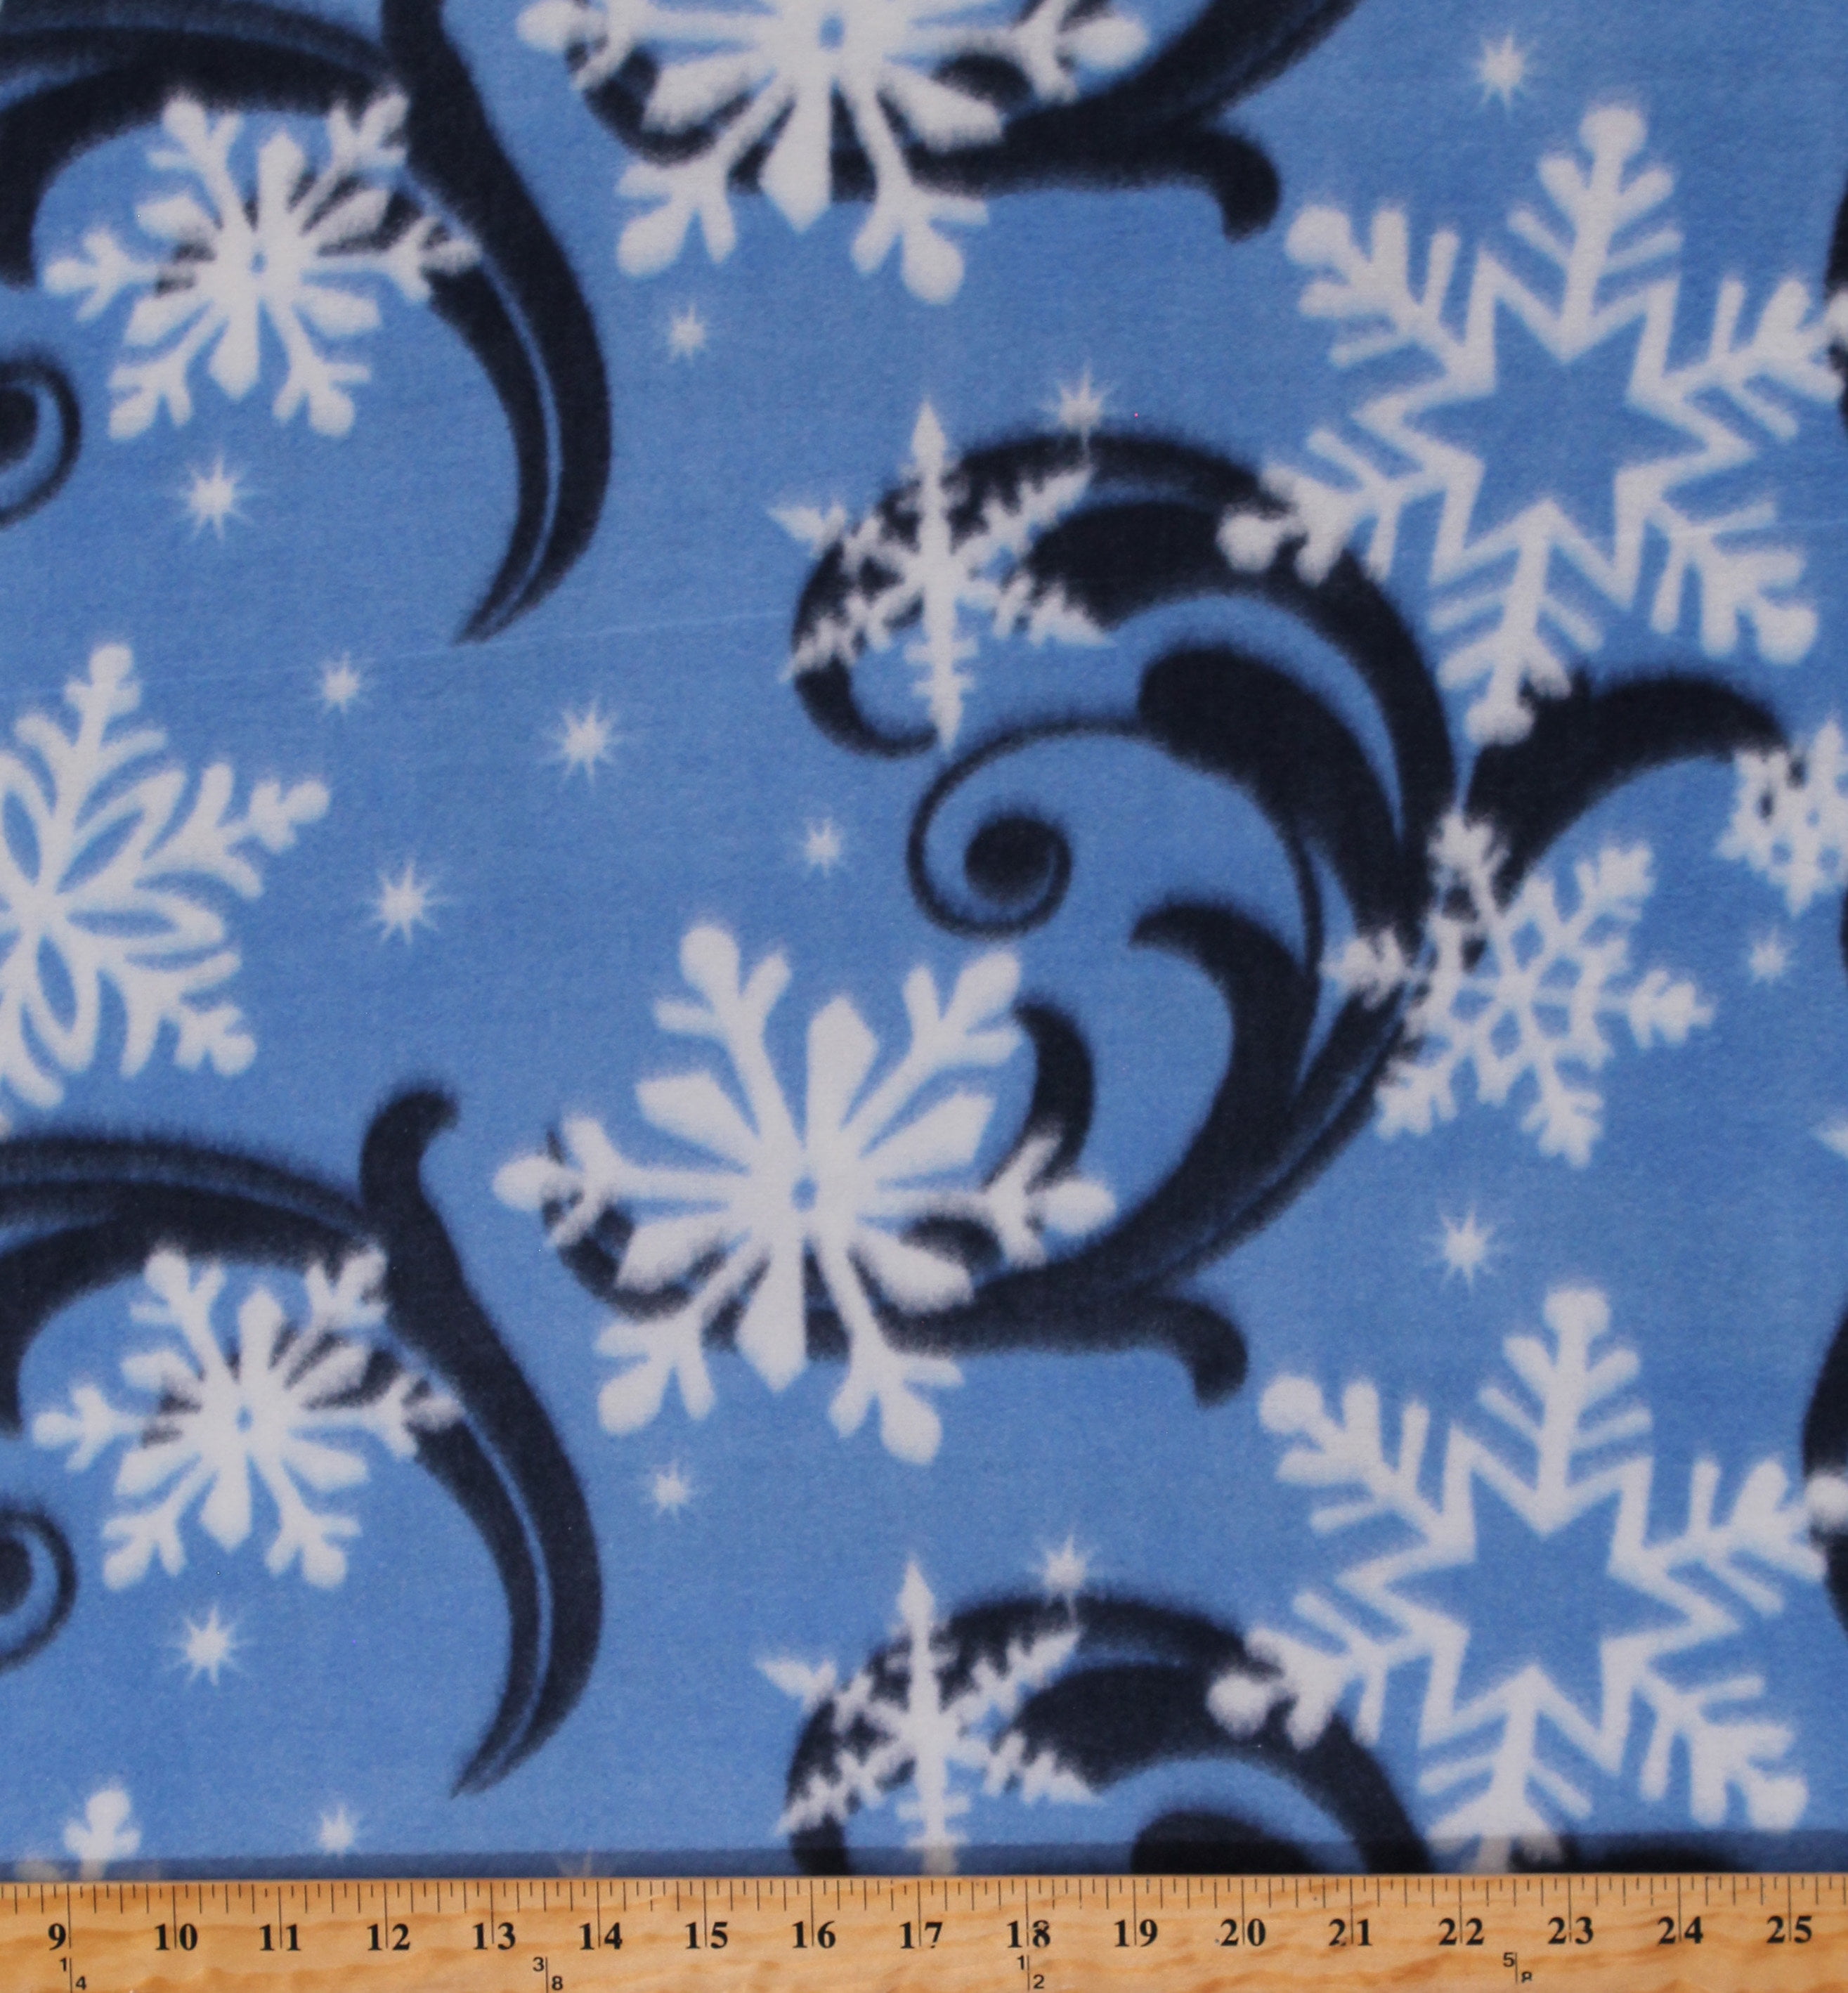 Blue Snowflake Winter Christmas Fleece Fabric  by the Yard  BTY 